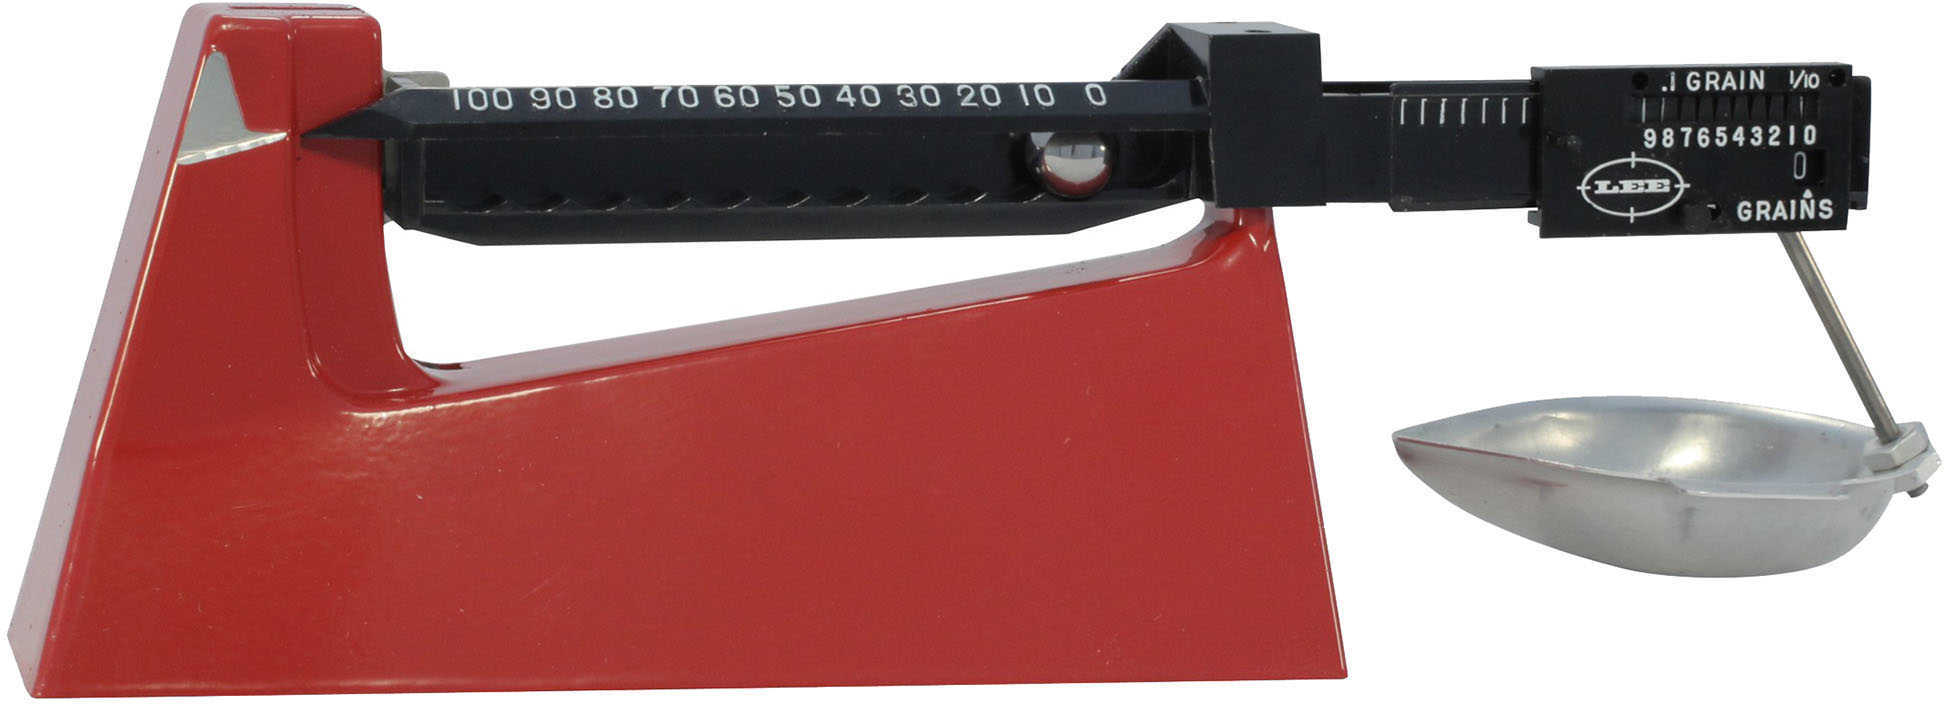 Lee Reloading Safety Powder Scale